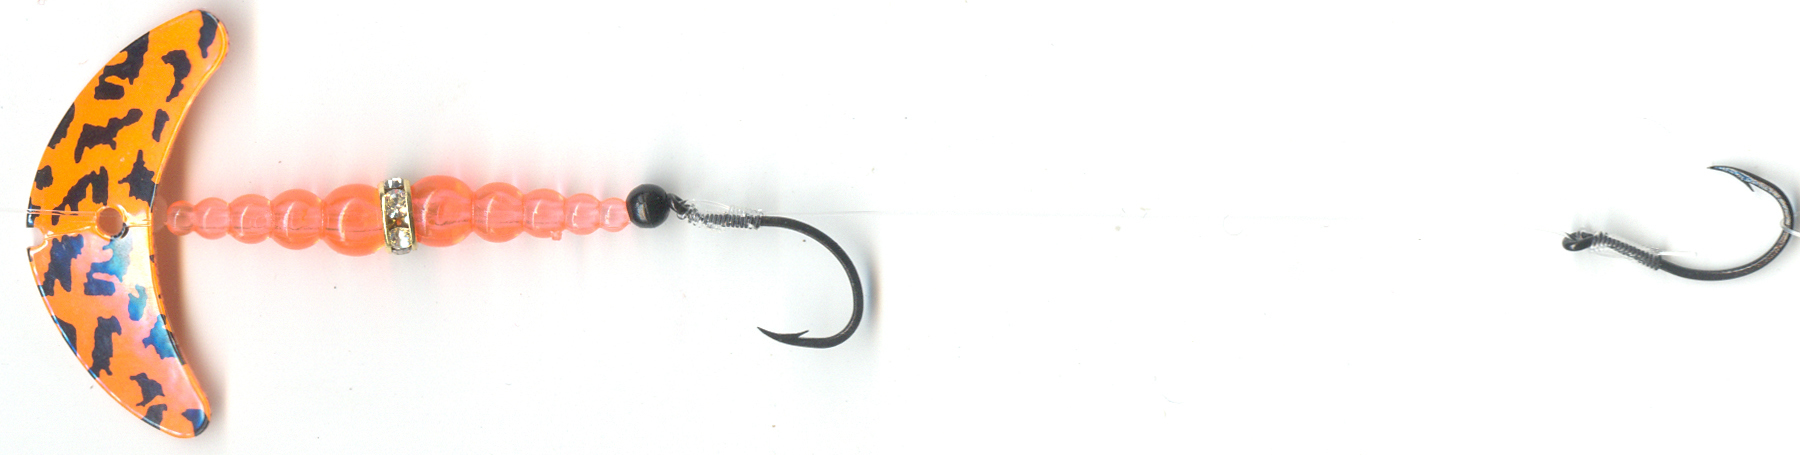 Mack's Lure Double Whammy Walleye Spinner Rig